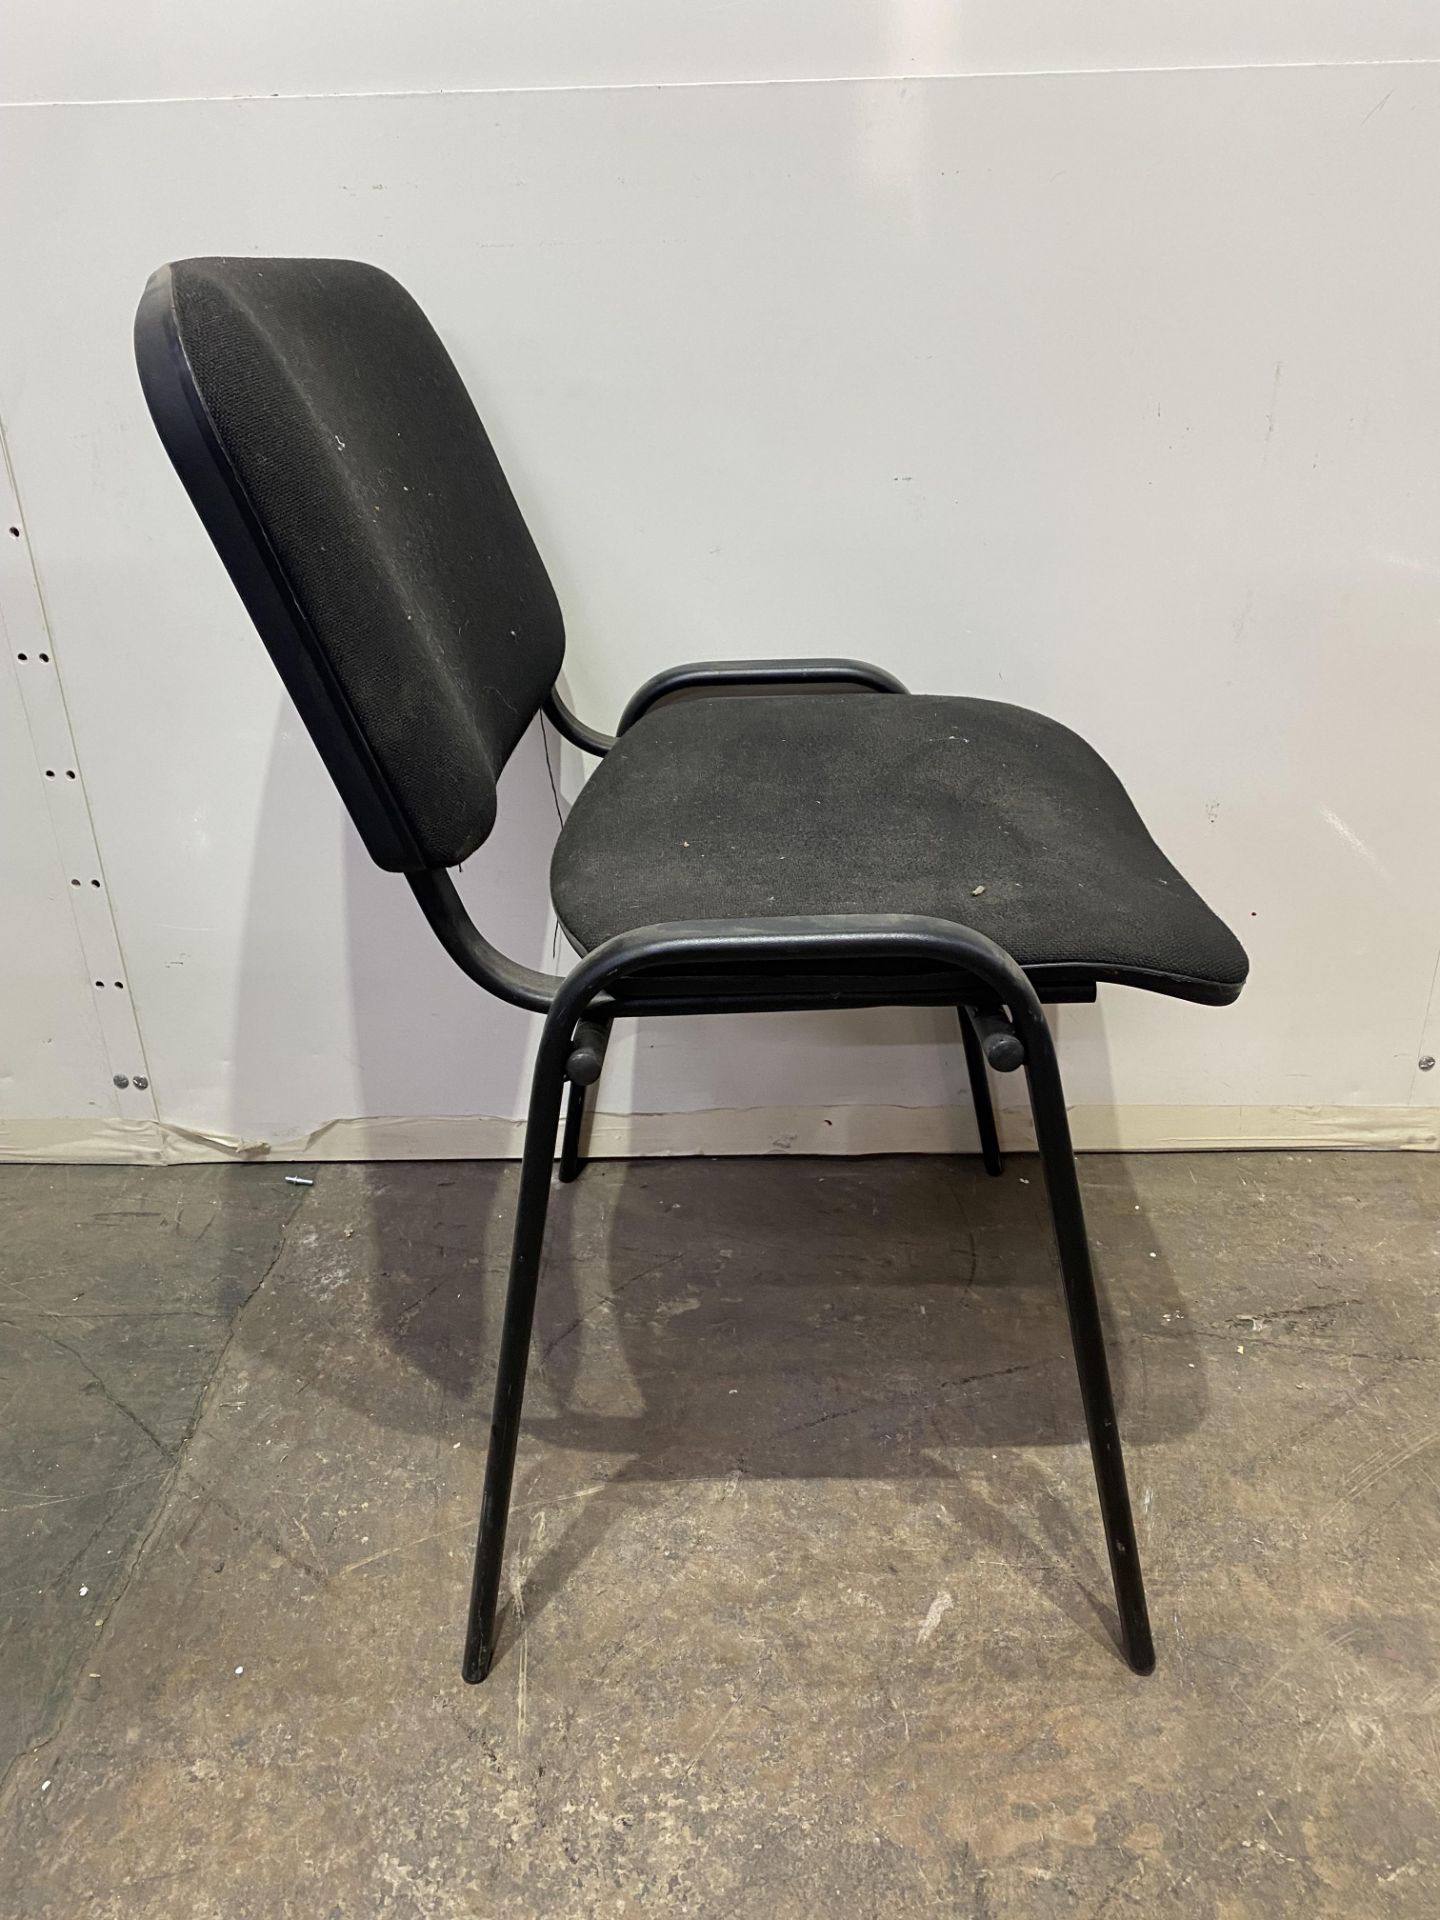 10 x Black Conference Chairs - Image 3 of 4